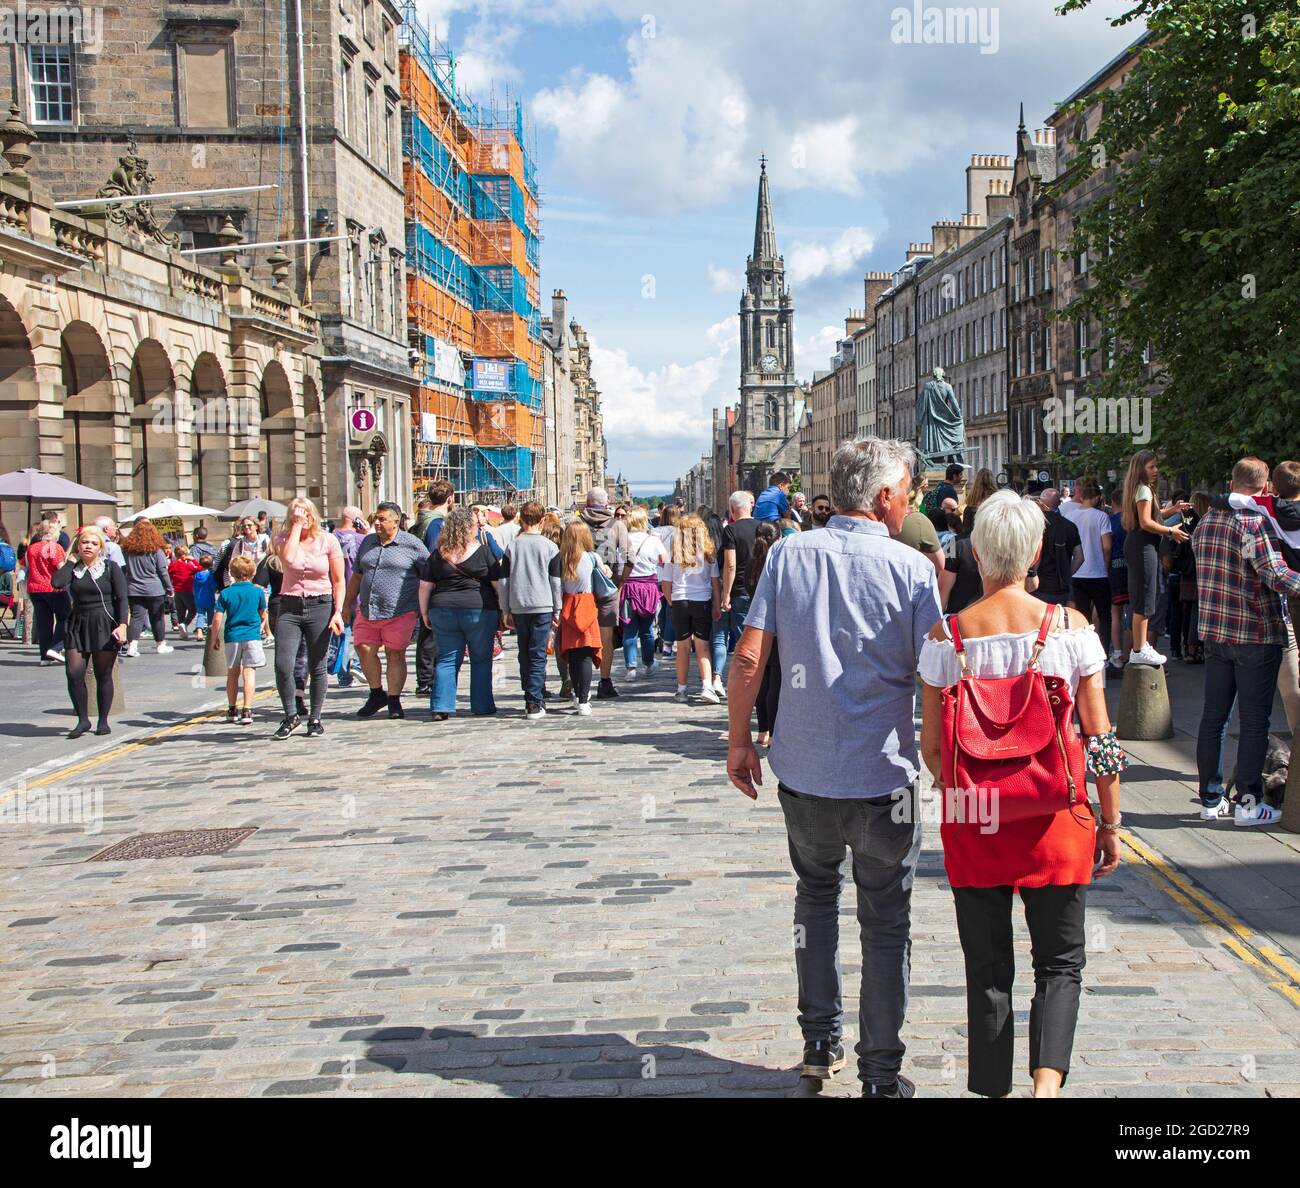 Edinburgh city centre, Scotland, UK weather. 10th August 2021. Hot and sunny with temperature over 21 degrees centigrade for visitors to the city centre. Credit: Arch White/Alamy Live News. Stock Photo